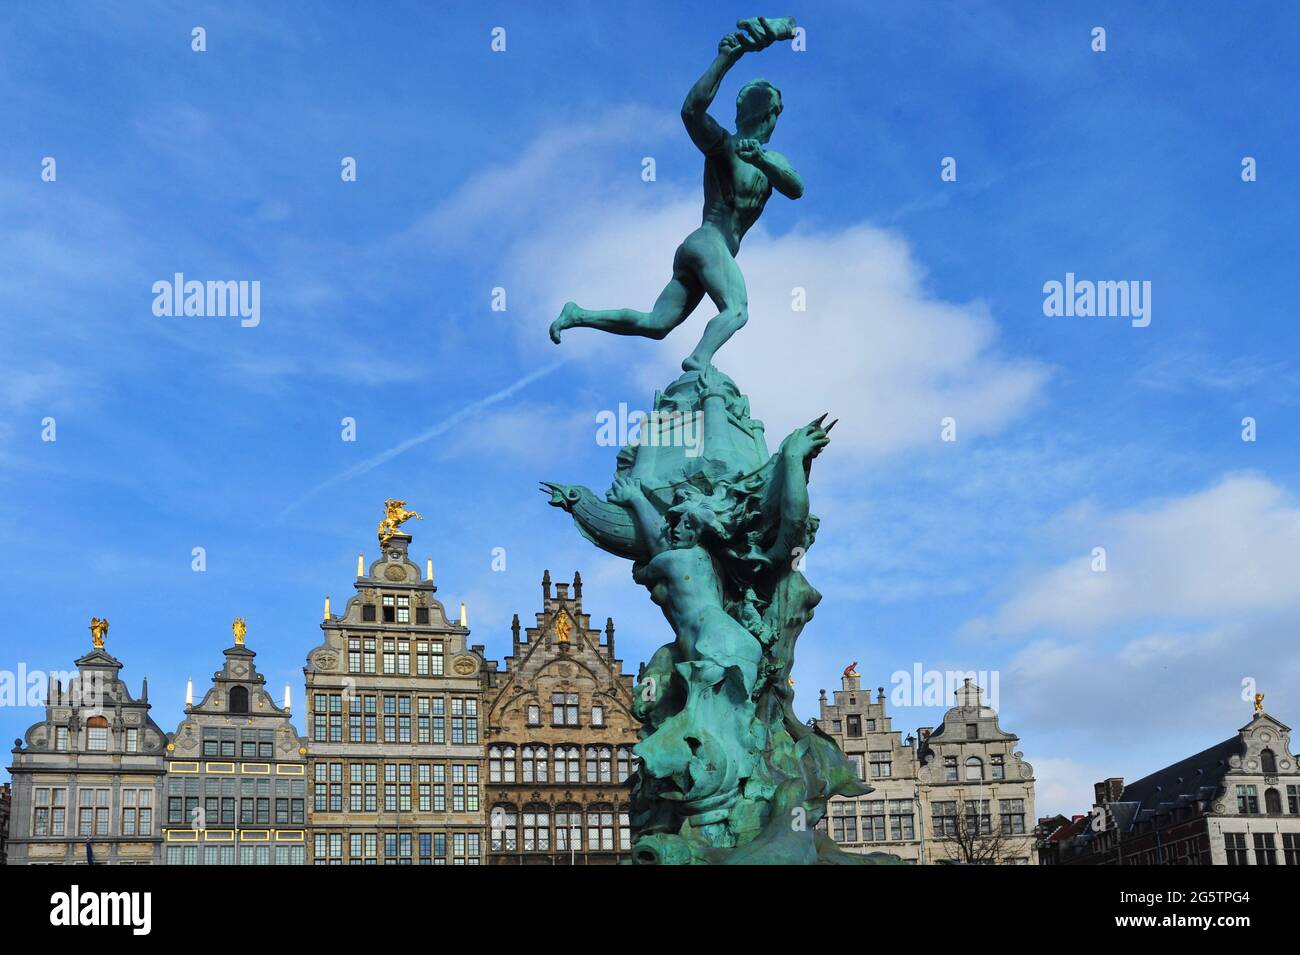 BELGIUM. ANTWERPEN. THE GREAT MARKET SQUARE OF ANTWERP WITH THE BRABO FOUNTAIN, CREATED BY JEF LAMBEAUX IN 1887, AND SOME ELABORATE 16TH CENTURY GUILD Stock Photo